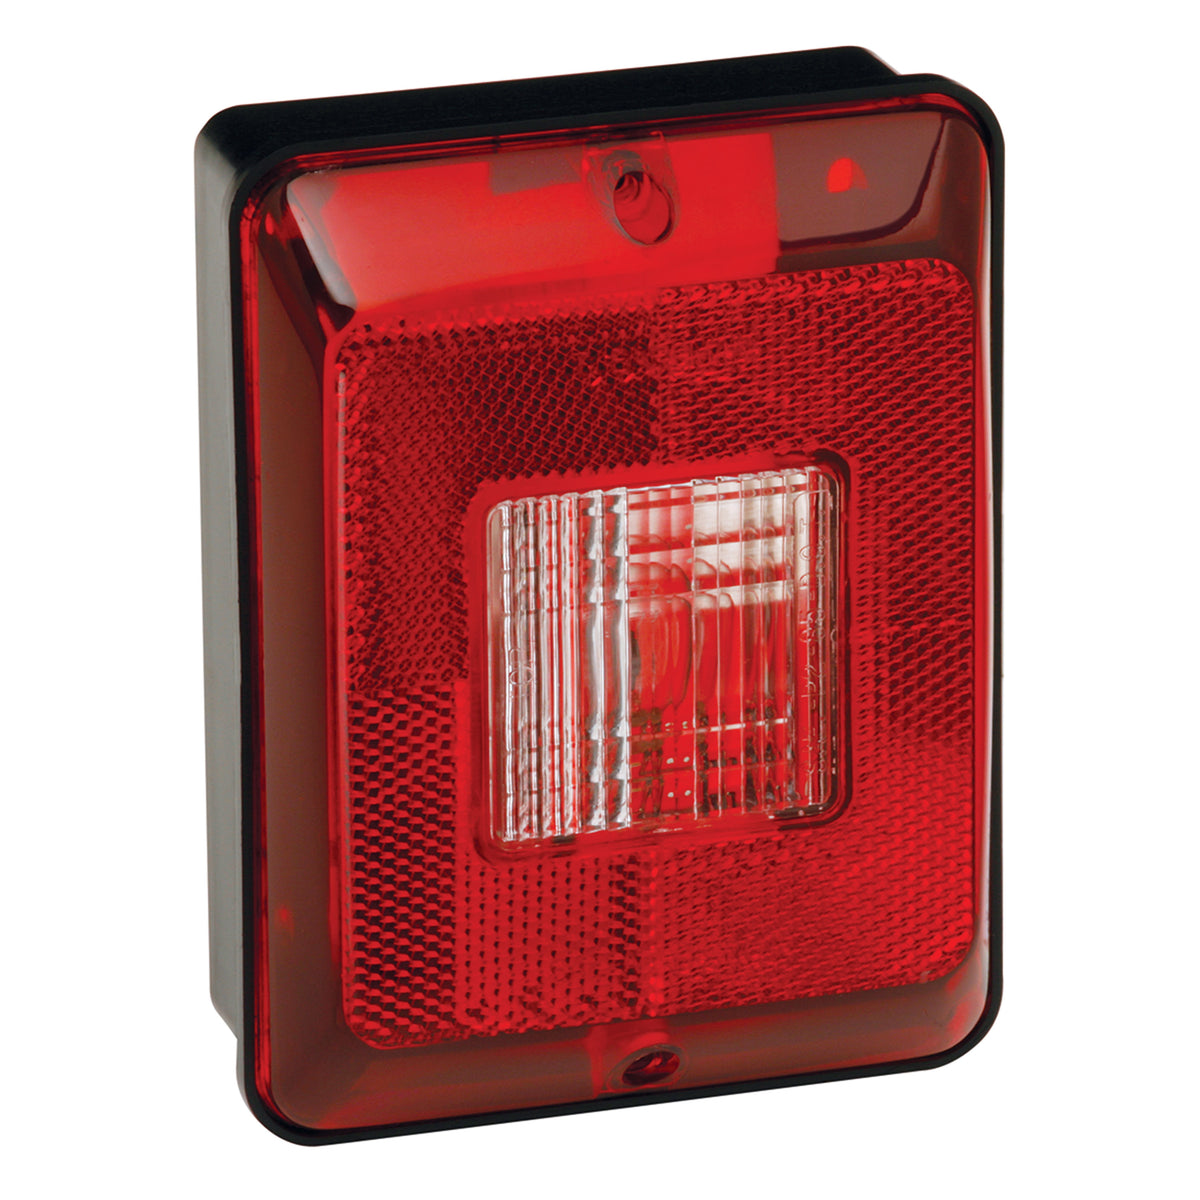 Bargman 31-86-103 Taillight #86 - Single Vertical Backup with Black Base